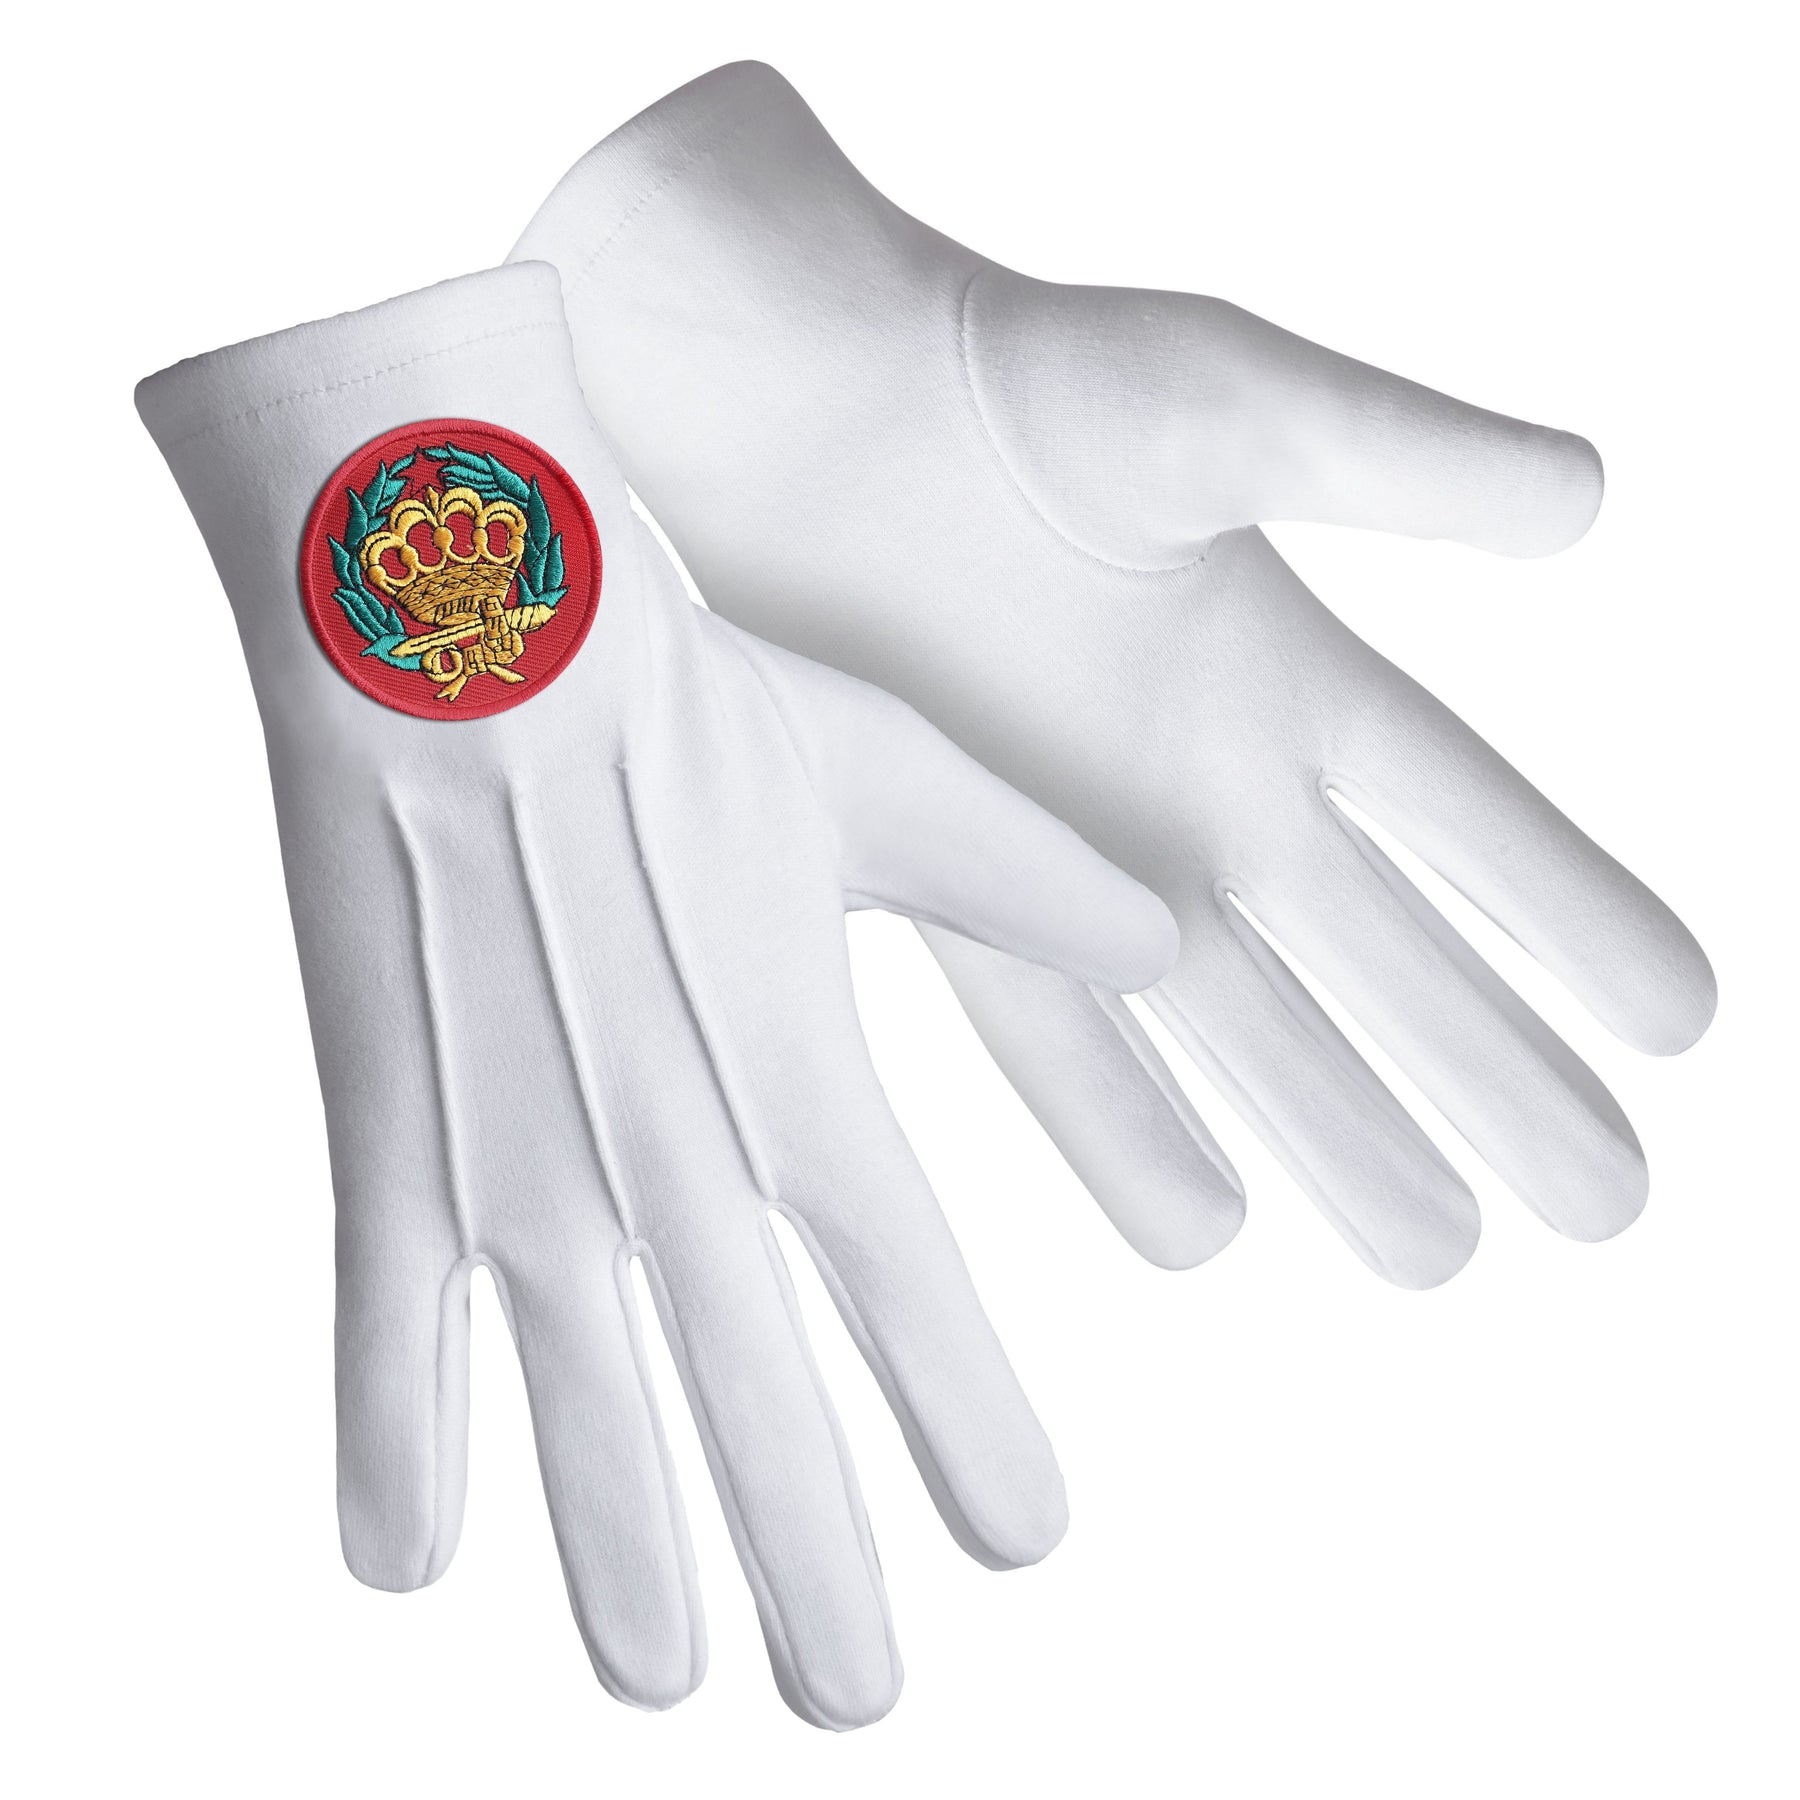 Order of the Amaranth Glove - Pure Cotton With Red Patch - Bricks Masons